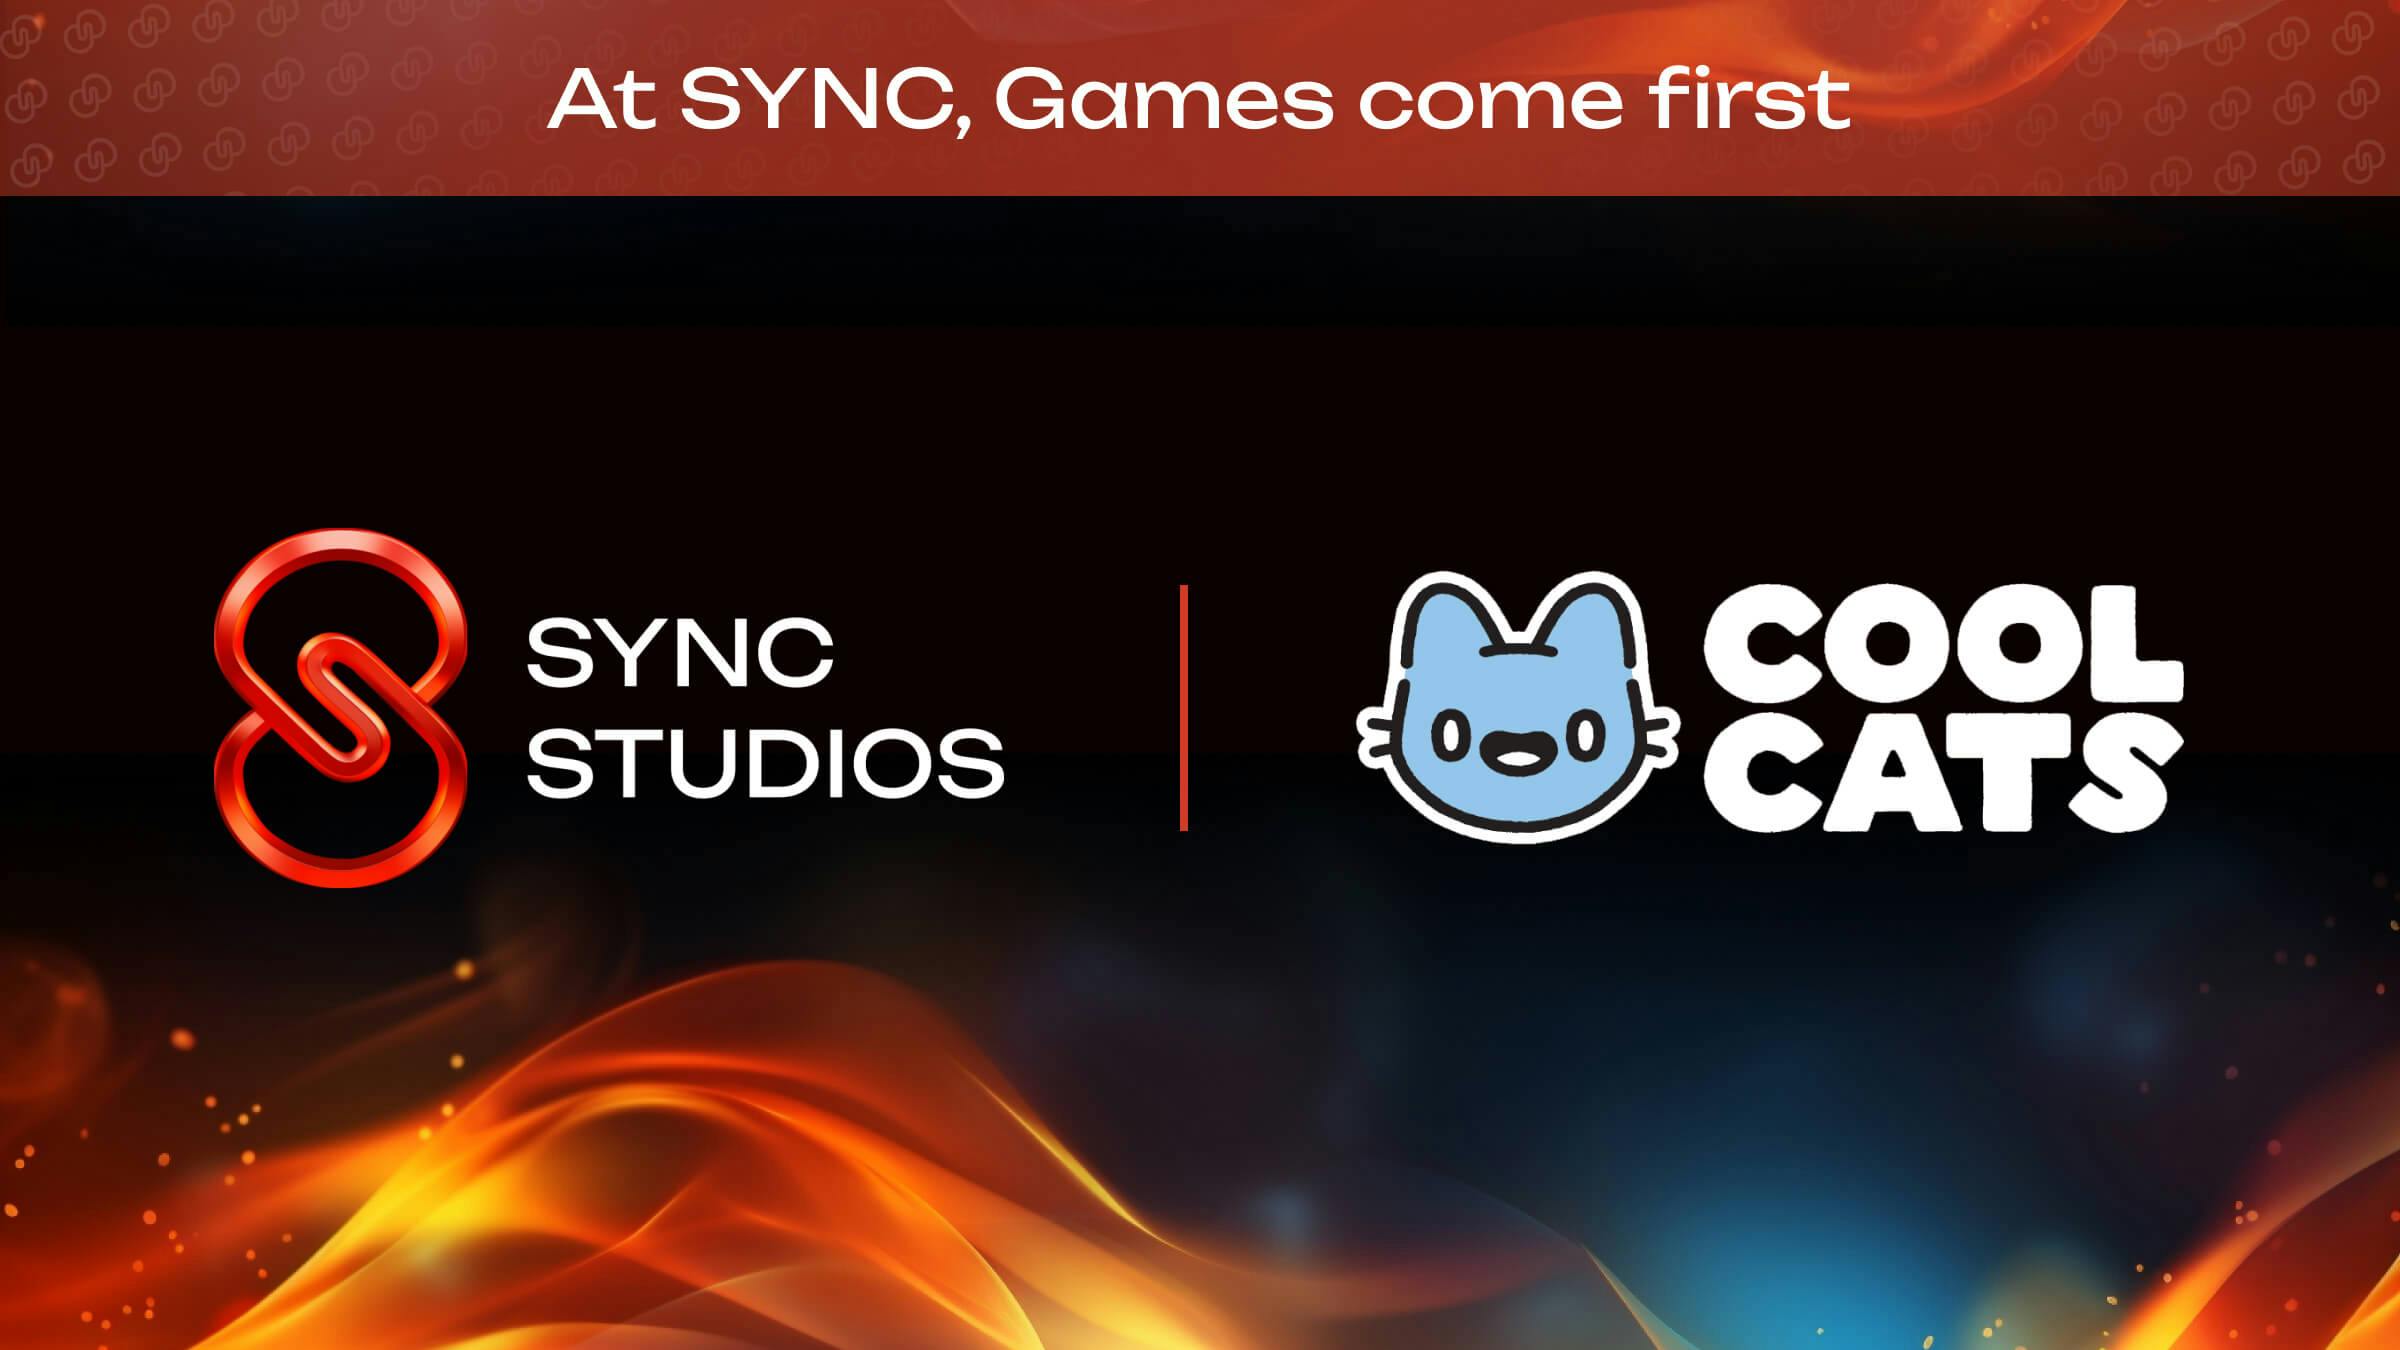 Sync-Studios-and-Cool-Cats-3-1.jpg